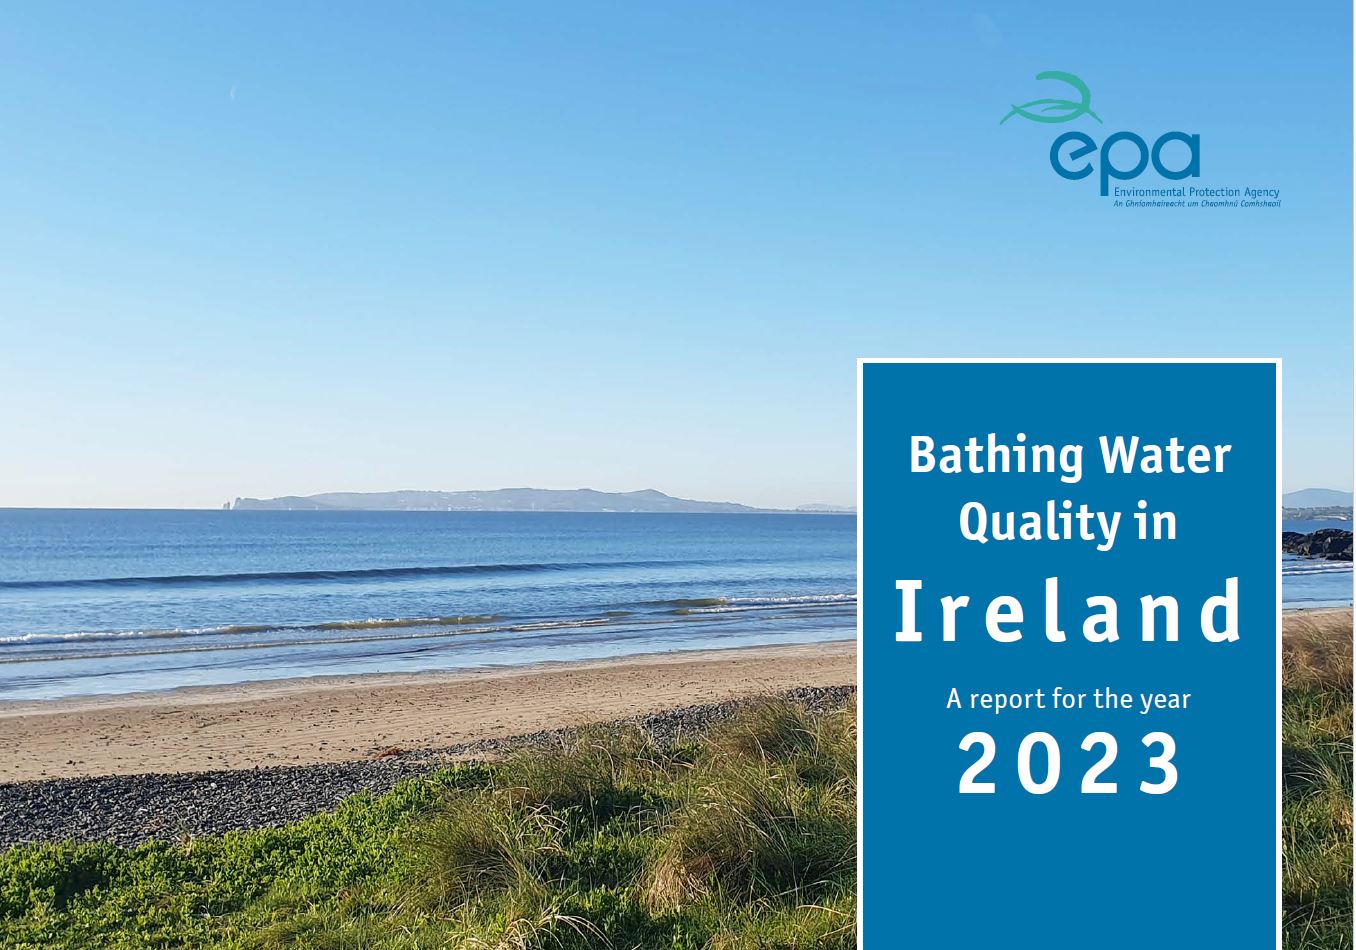 The cover of the report 'Bathing Water Quality in Ireland 2023'